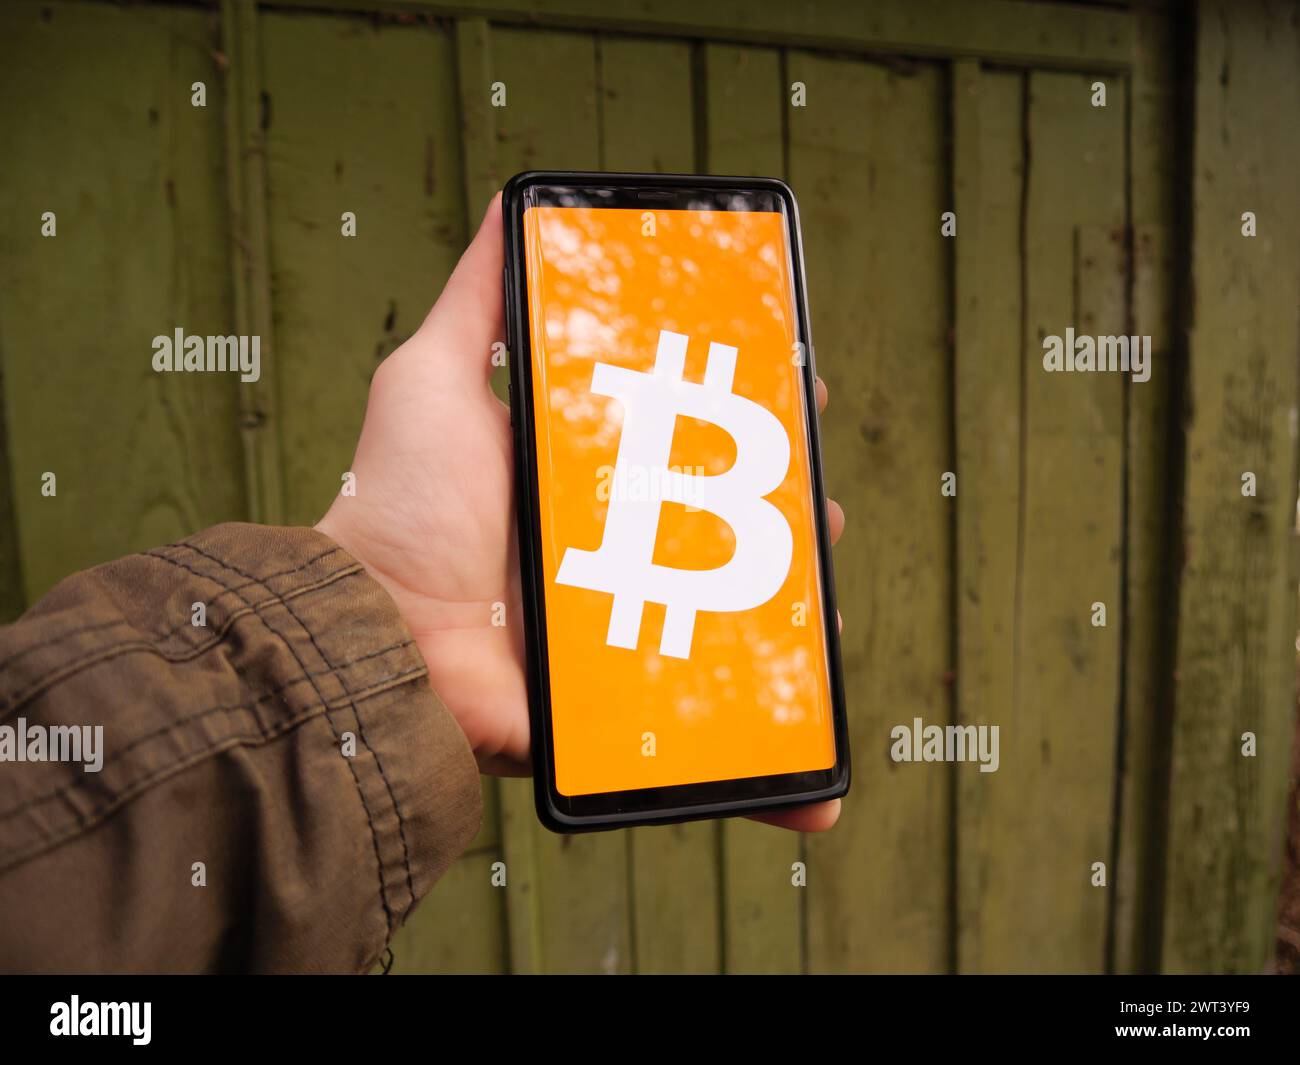 Bitcoin symbol displayed on a smartphone screen. BTC is a crypto coin from the world of cryptocurrency. Stock Photo